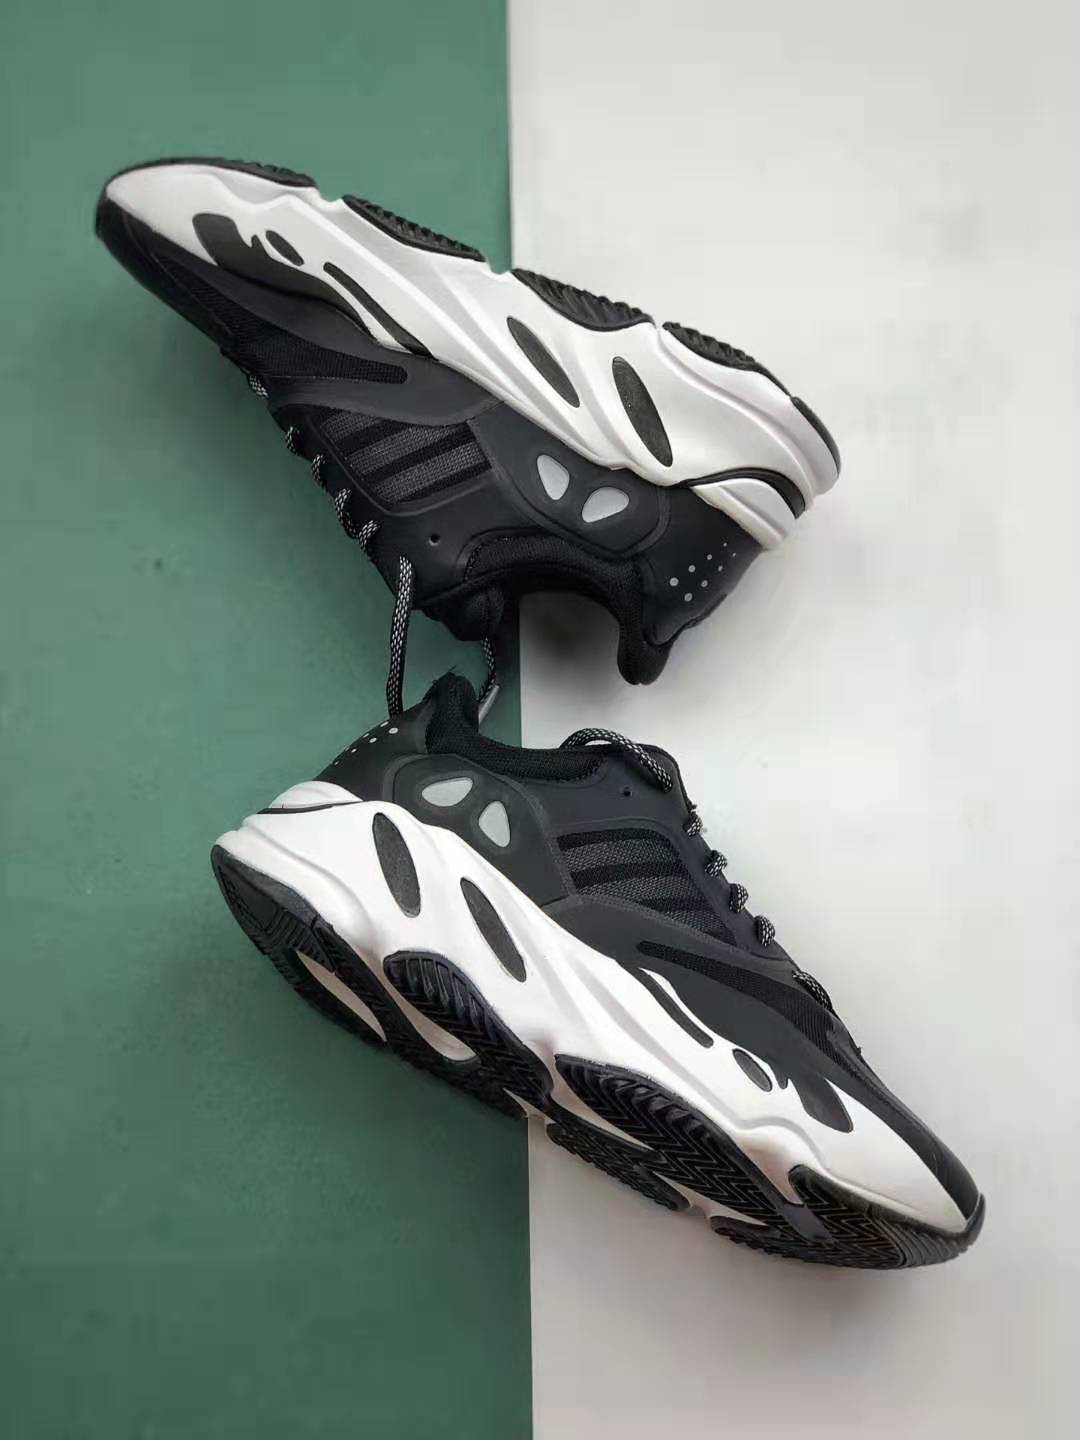 Adidas Yeezy Boost 700 Black White EG6991 | Limited Edition Sneakers